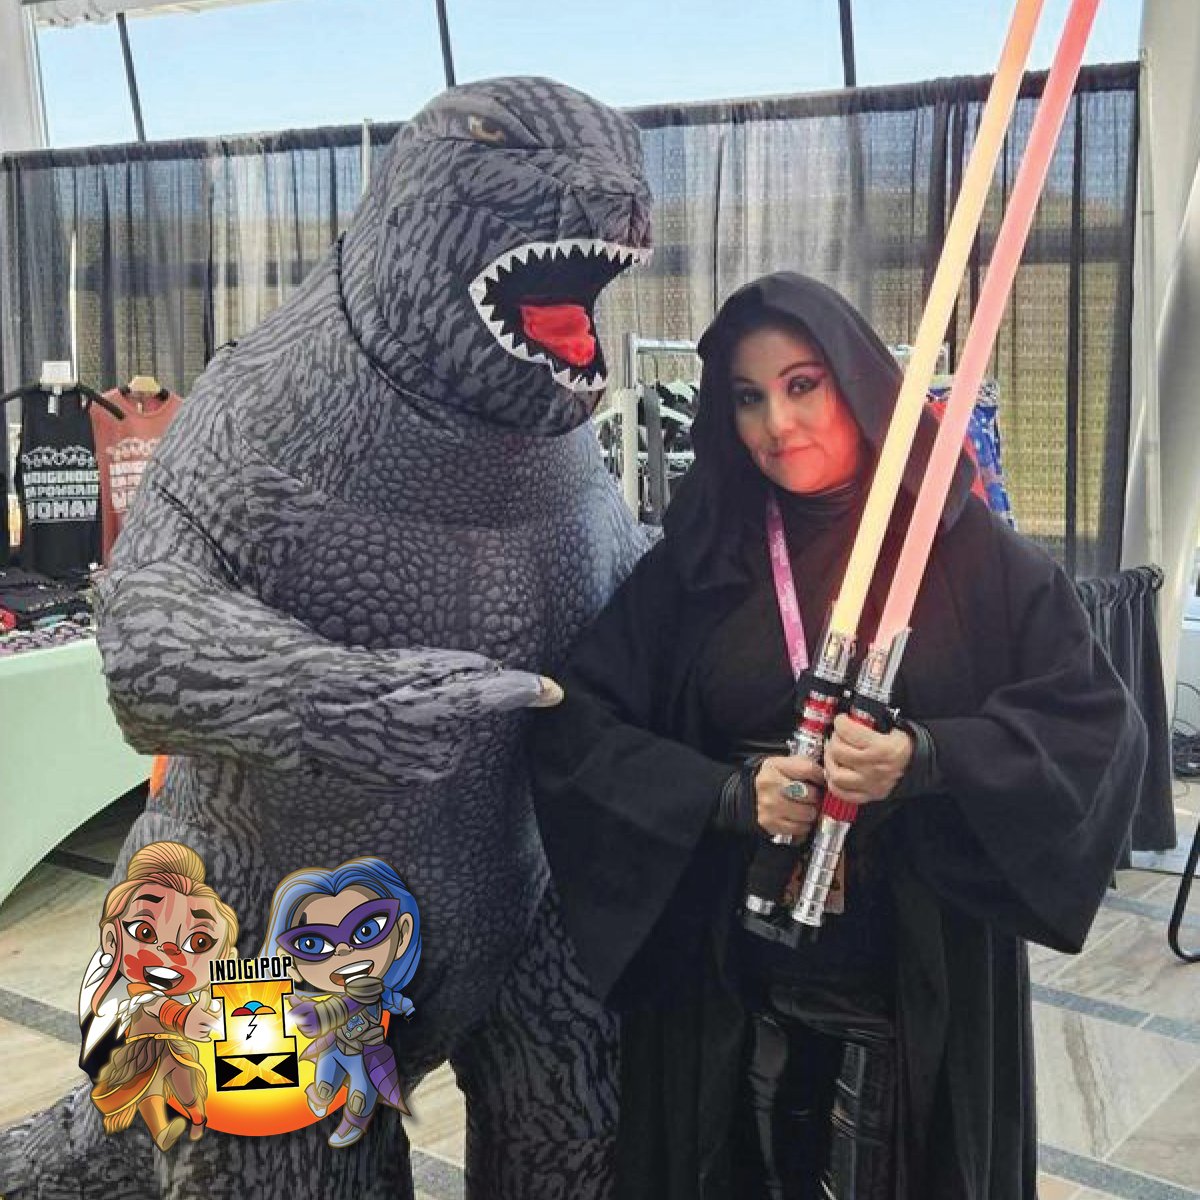 MAY THE FOURTH BE WITH YOU! Flash back w/ a Star Wars/Kaiju mashup #INDIGIPOPX2024 at @FAMokMuseum! Godzilla (mighty morphin cosplayer Don Roy) meets Sith Lord (Native Realities' own Kim Delfina Gleason) in the Artist Alley! Share your Star Wars cosplay photos in the comments!